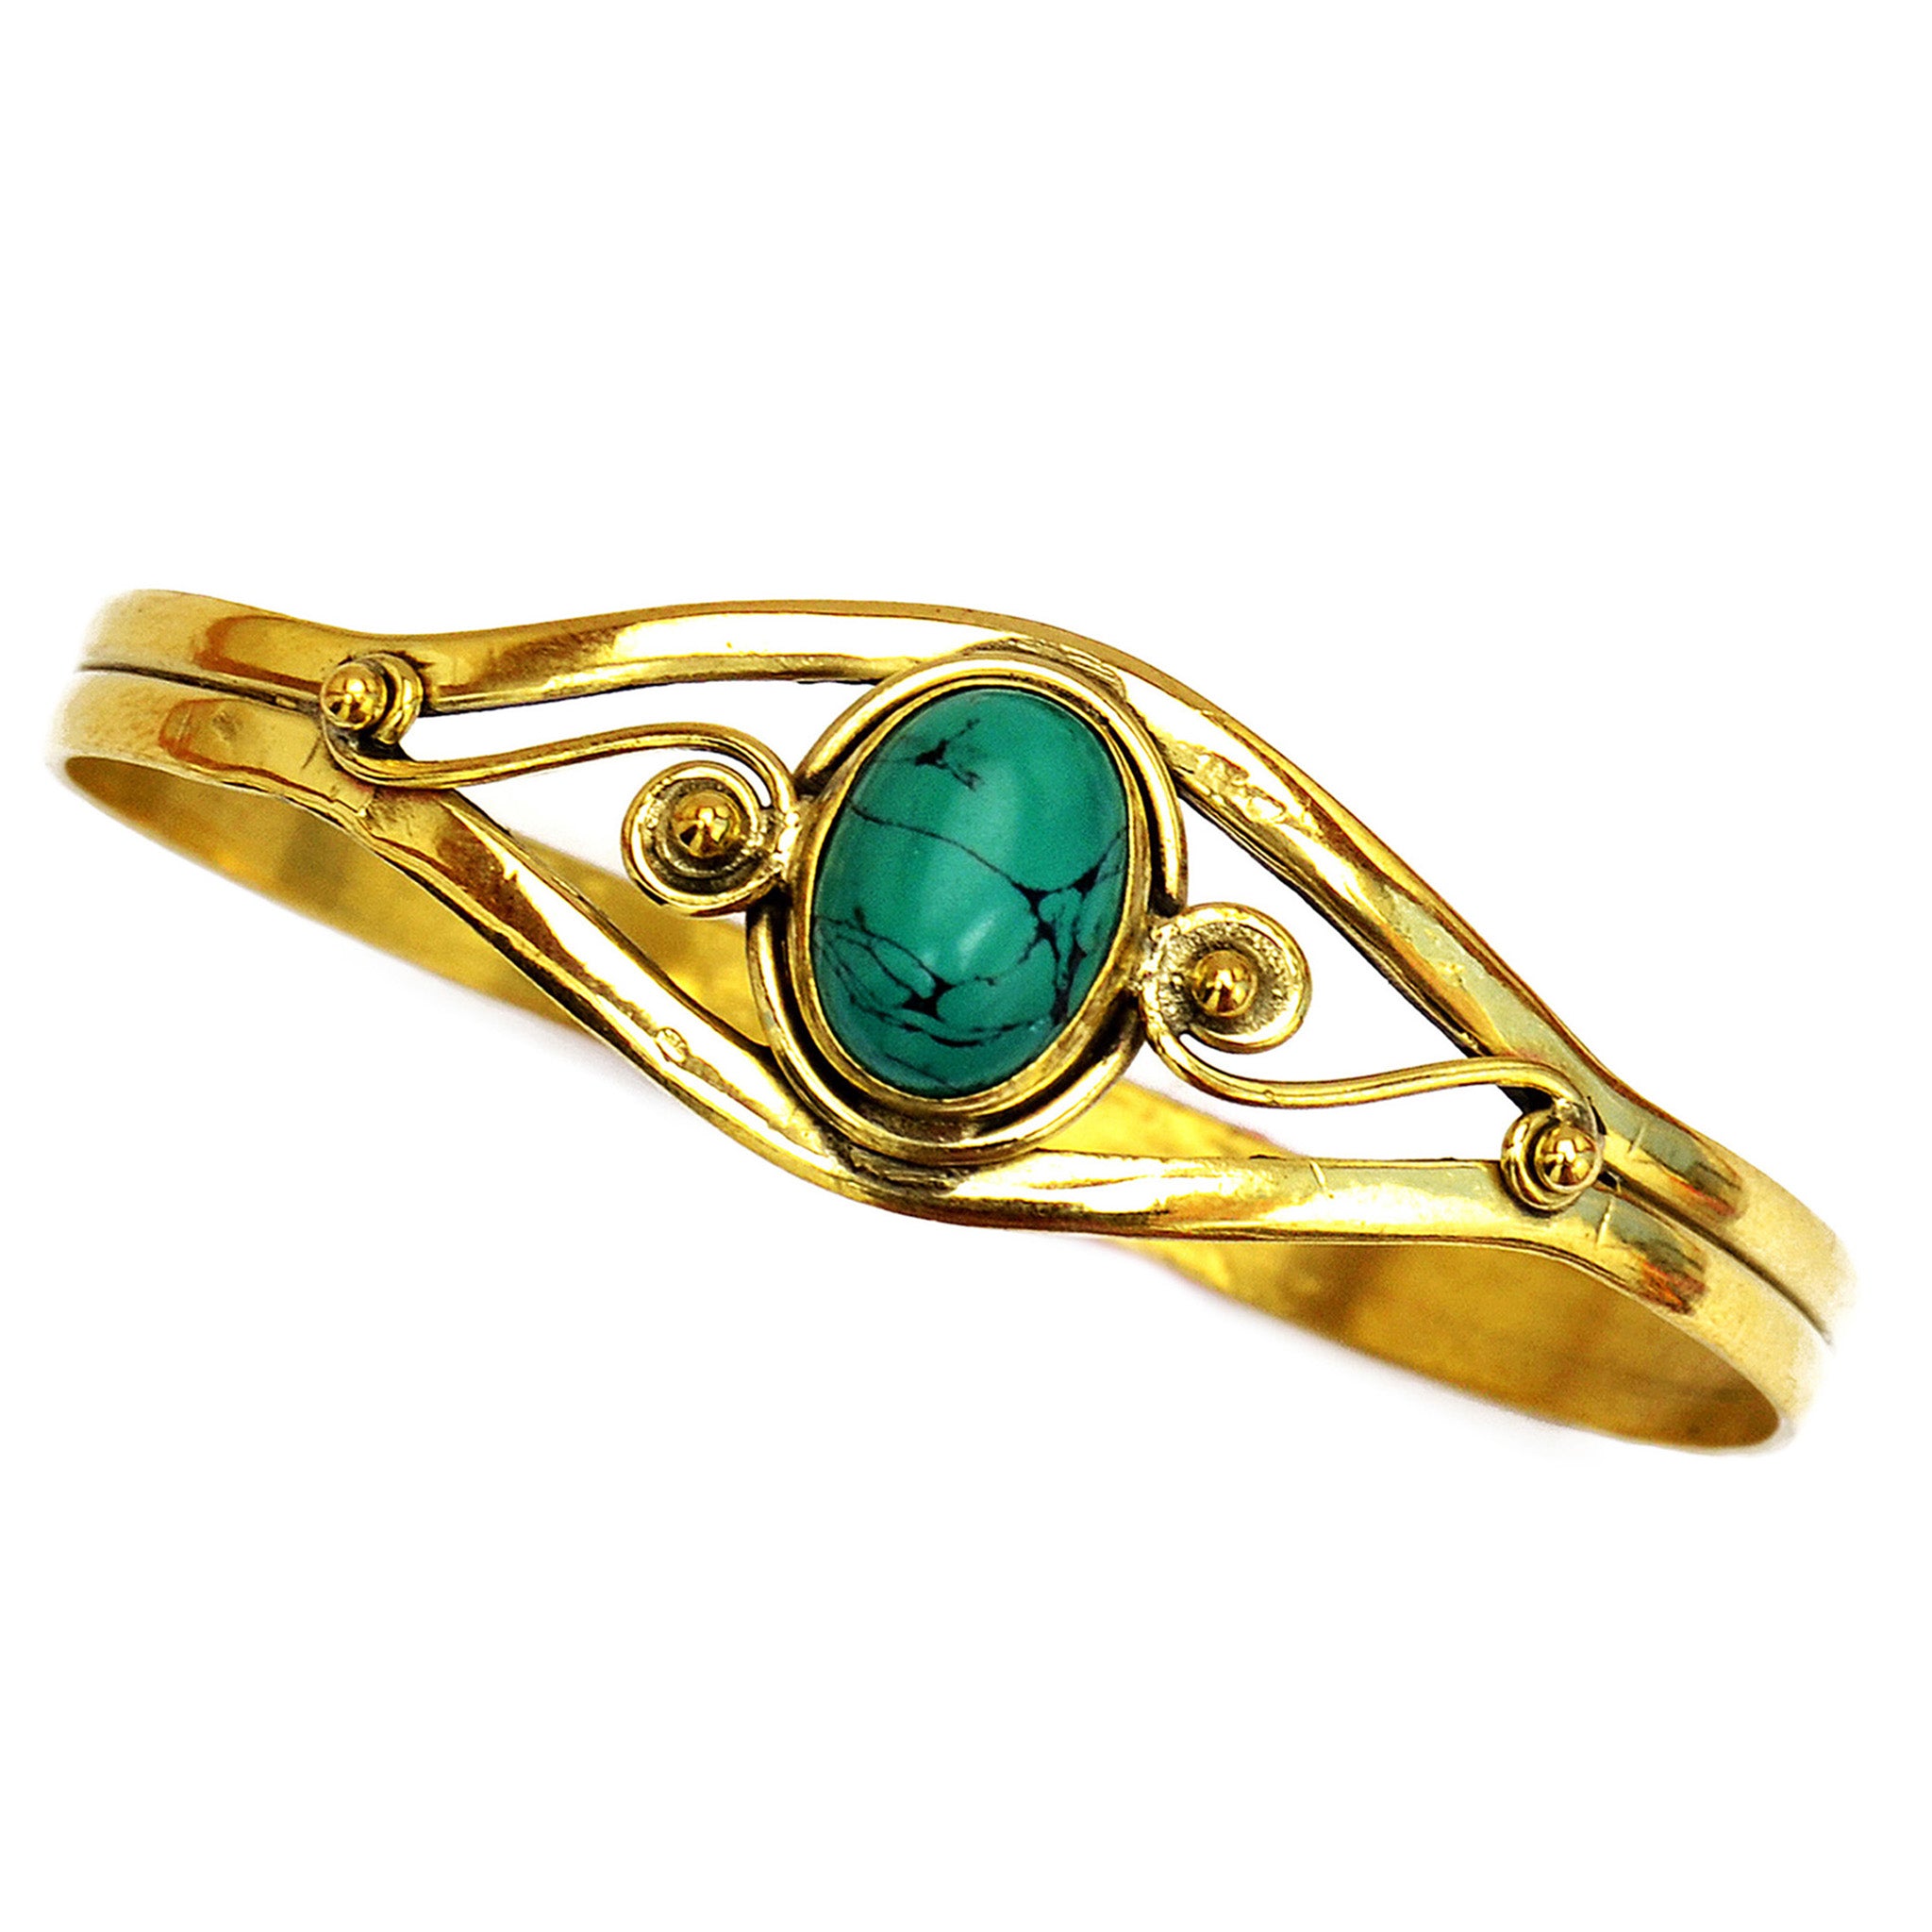 Indian cuff bracelet with turquoise stone